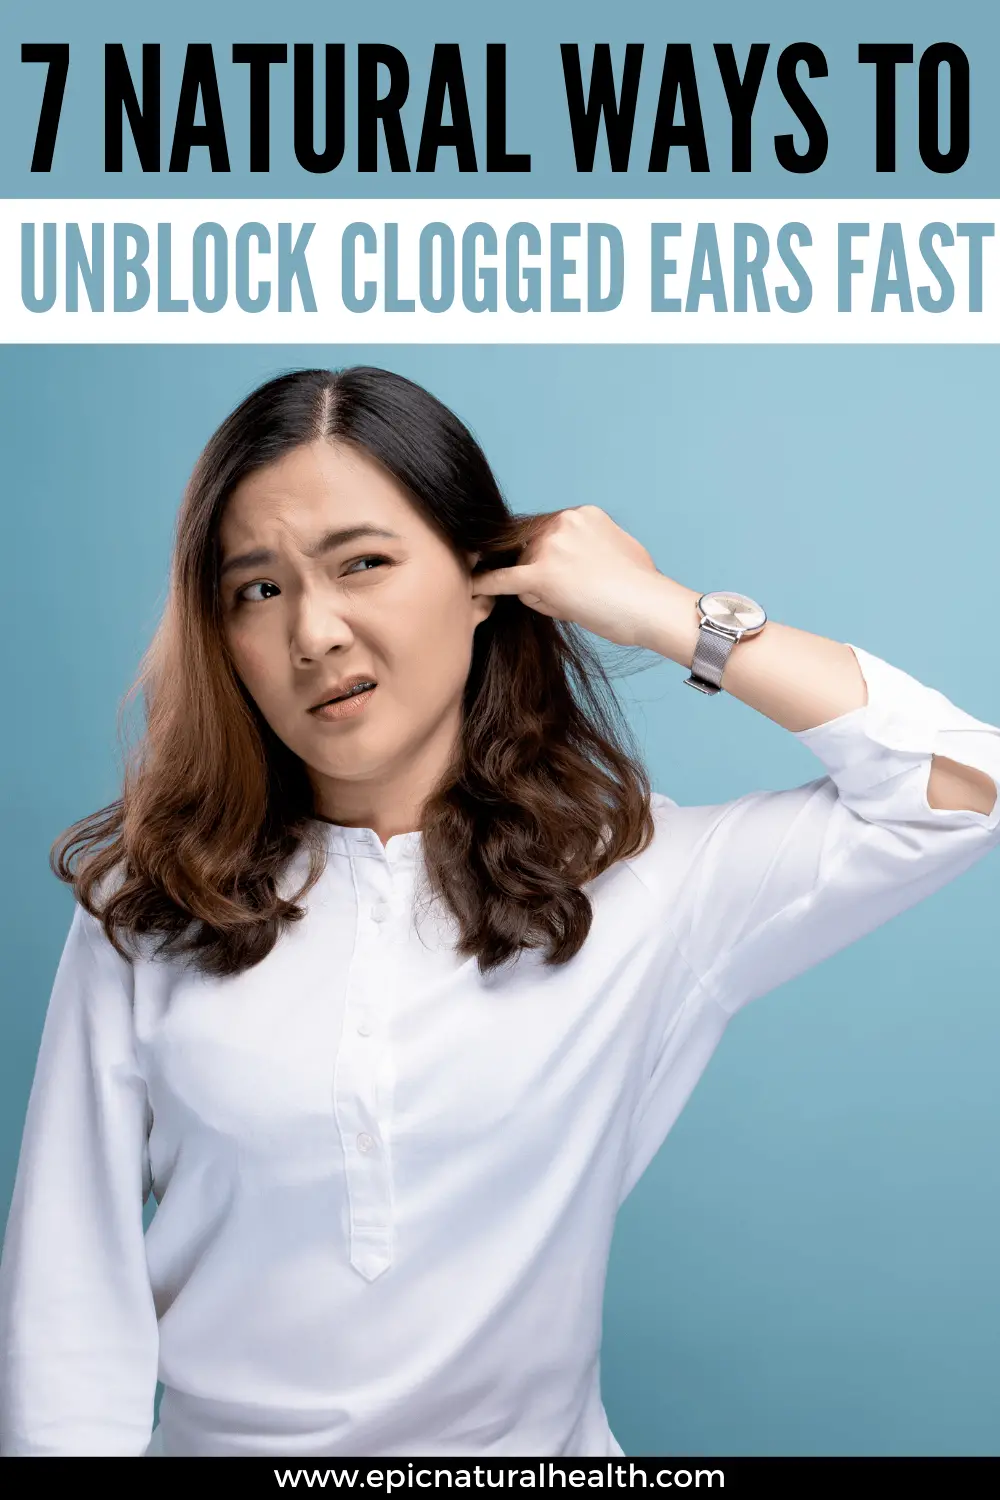 7 Natural Ways to Unblock Clogged Ears Fast